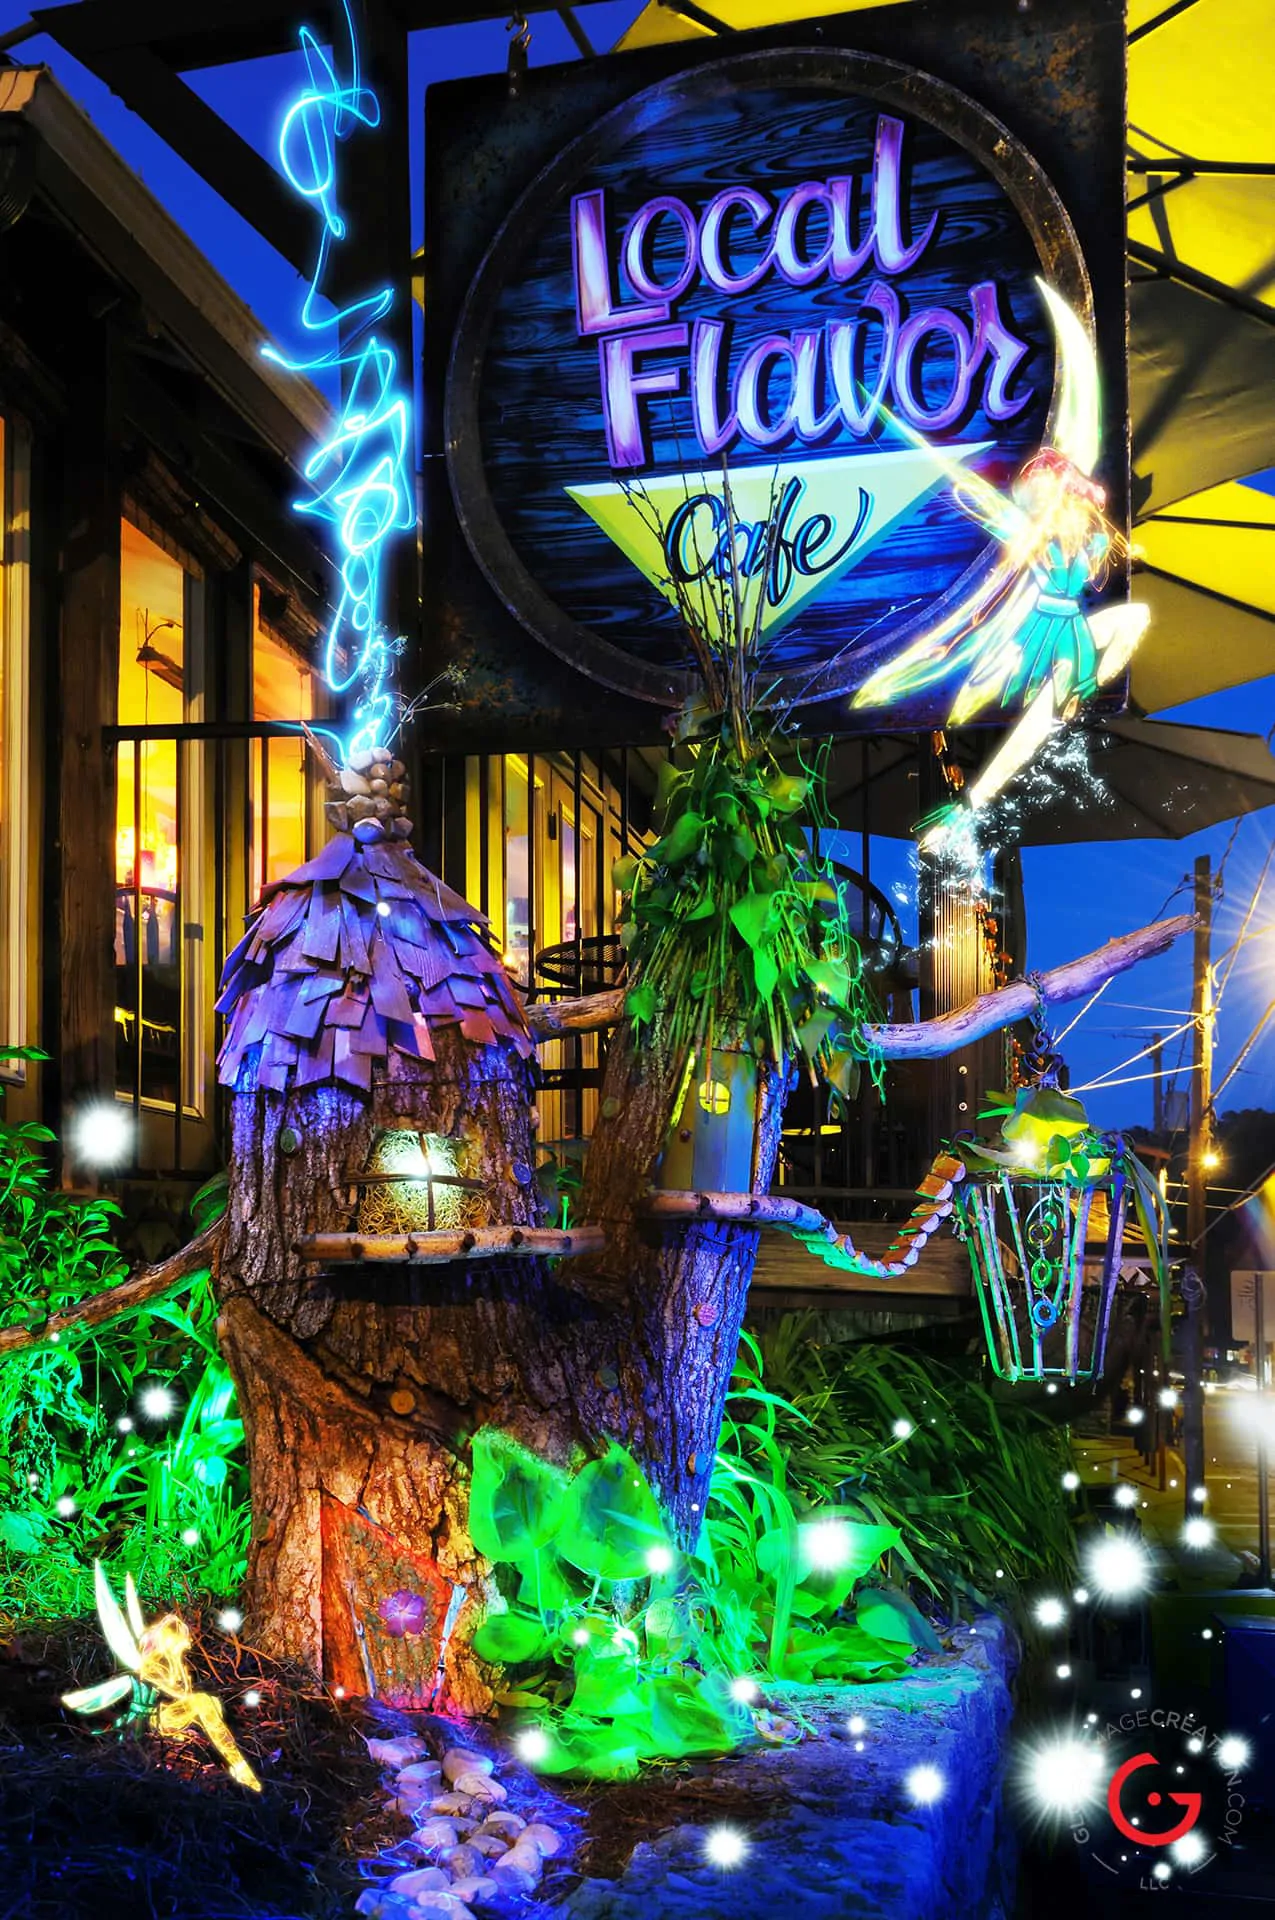 Are Fairies Real at Local Flavor Cafe, Light Painting Photography from Public Art Project Electric Vision - Eureka Springs, Arkansas